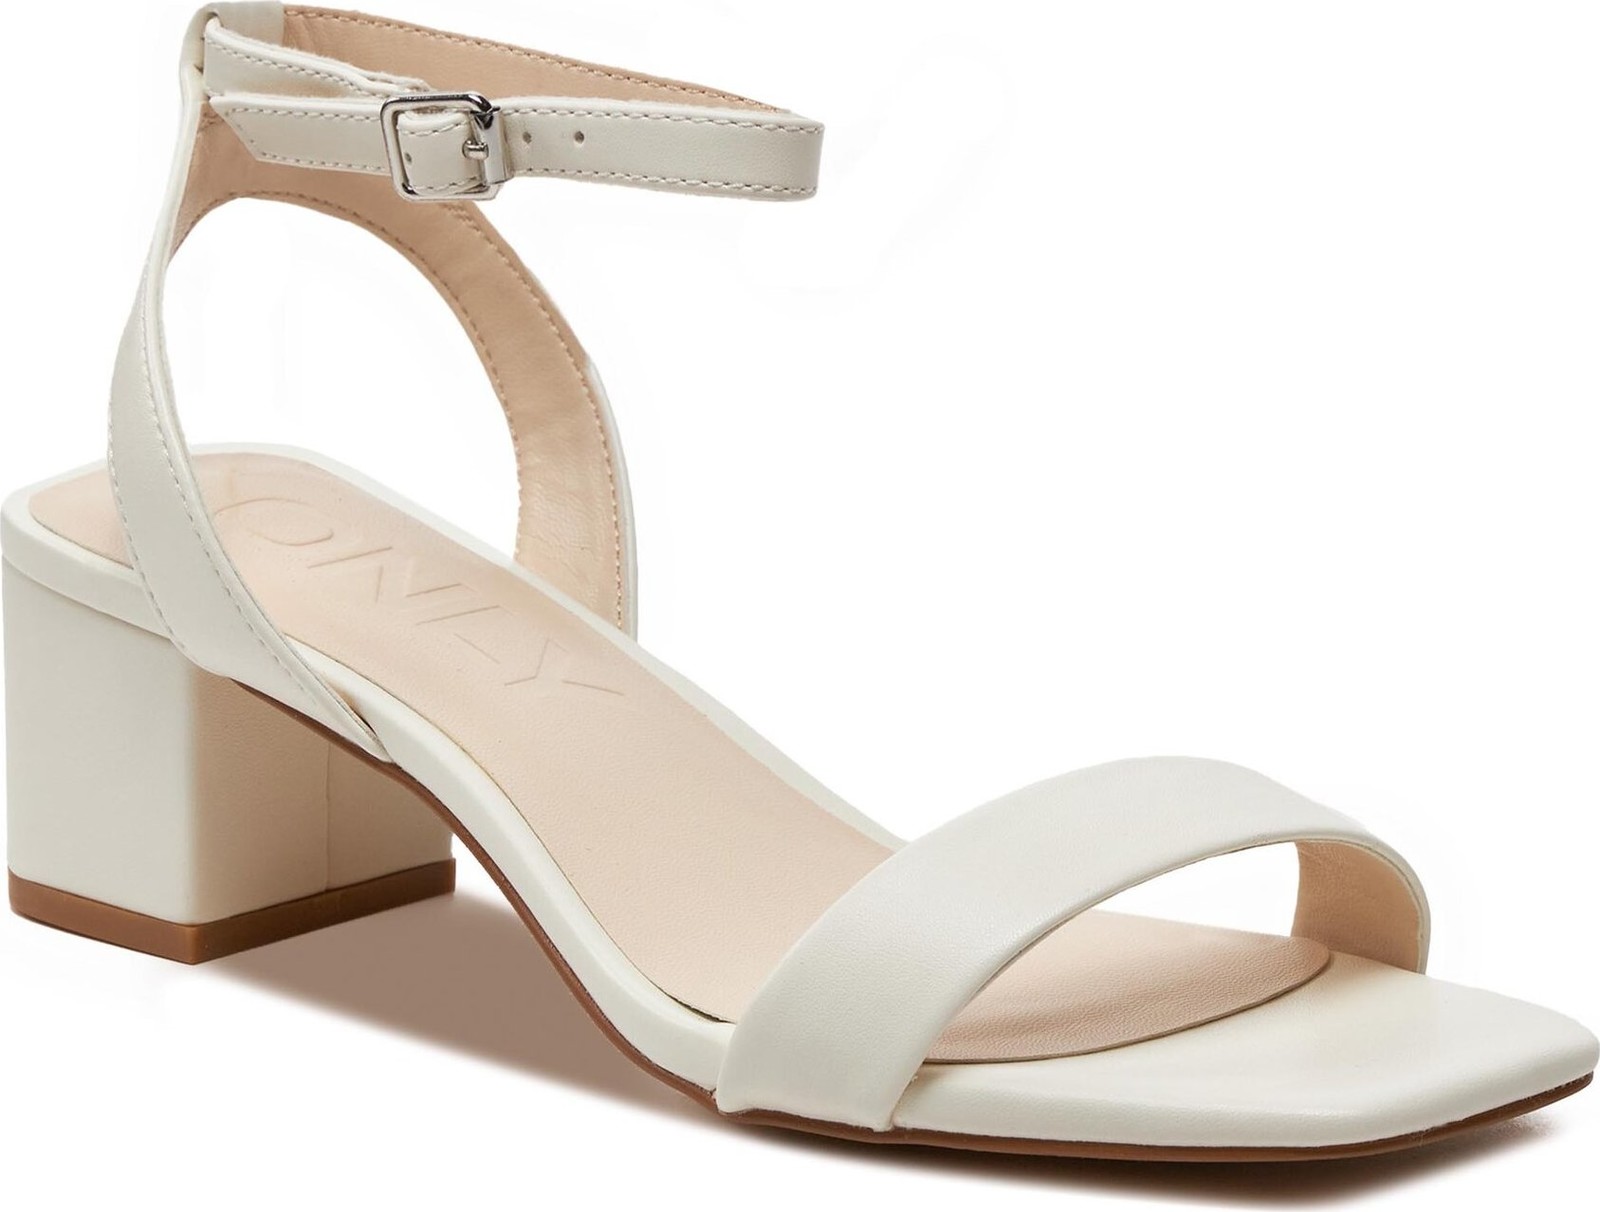 Sandály ONLY Shoes Onlhanna-1 15289351 White